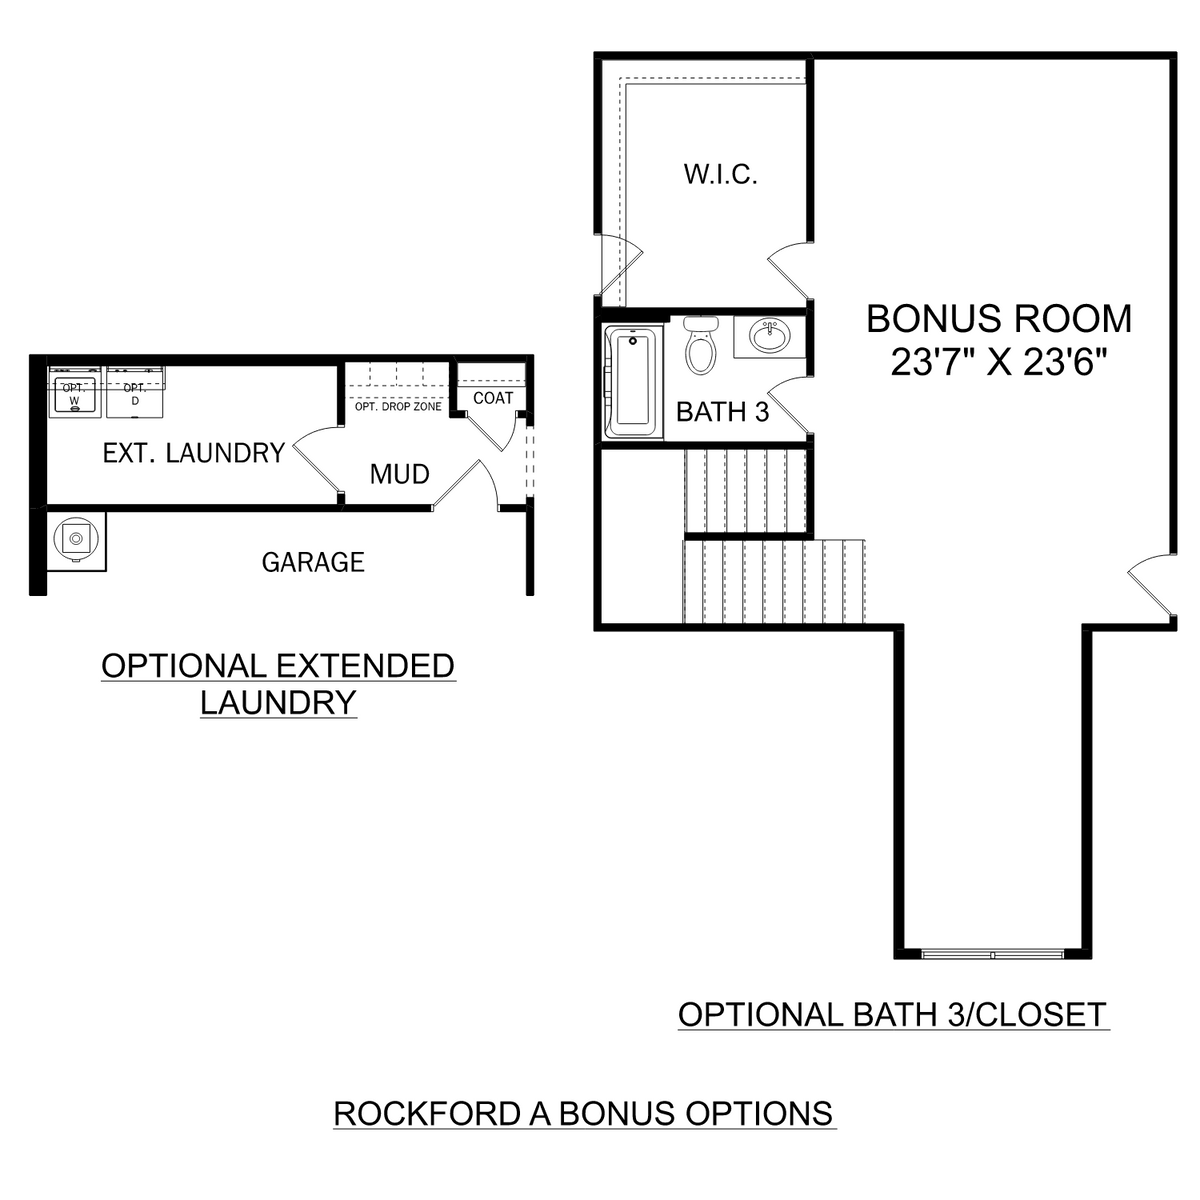 3 - The Rockford with Bonus buildable floor plan layout in Davidson Homes' Kendall Downs community.